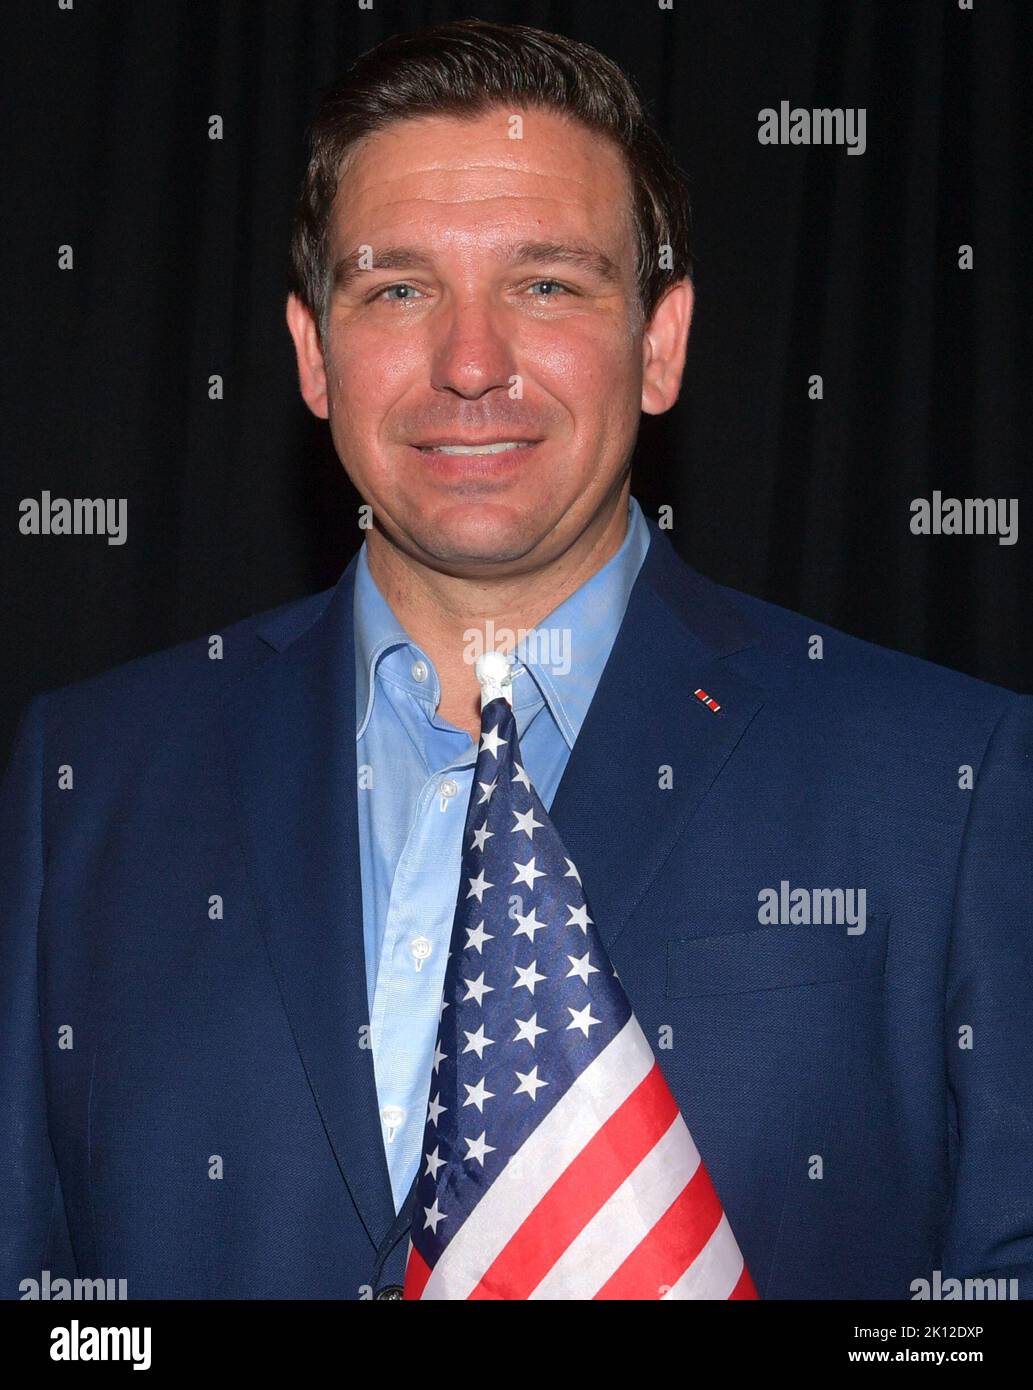 BOCA RATON, FL - NOVEMBER 04: (EXCLUSIVE COVERAGE)  Ron DeSantis, and his wife Casey DeSantis along with Attorney General Pam Bondi pose back stage with the America Flag in Boca Raton on November 4, 2018 in Boca Raton, Florida.  People:  Ron DeSantis, Casey DeSantis Stock Photo